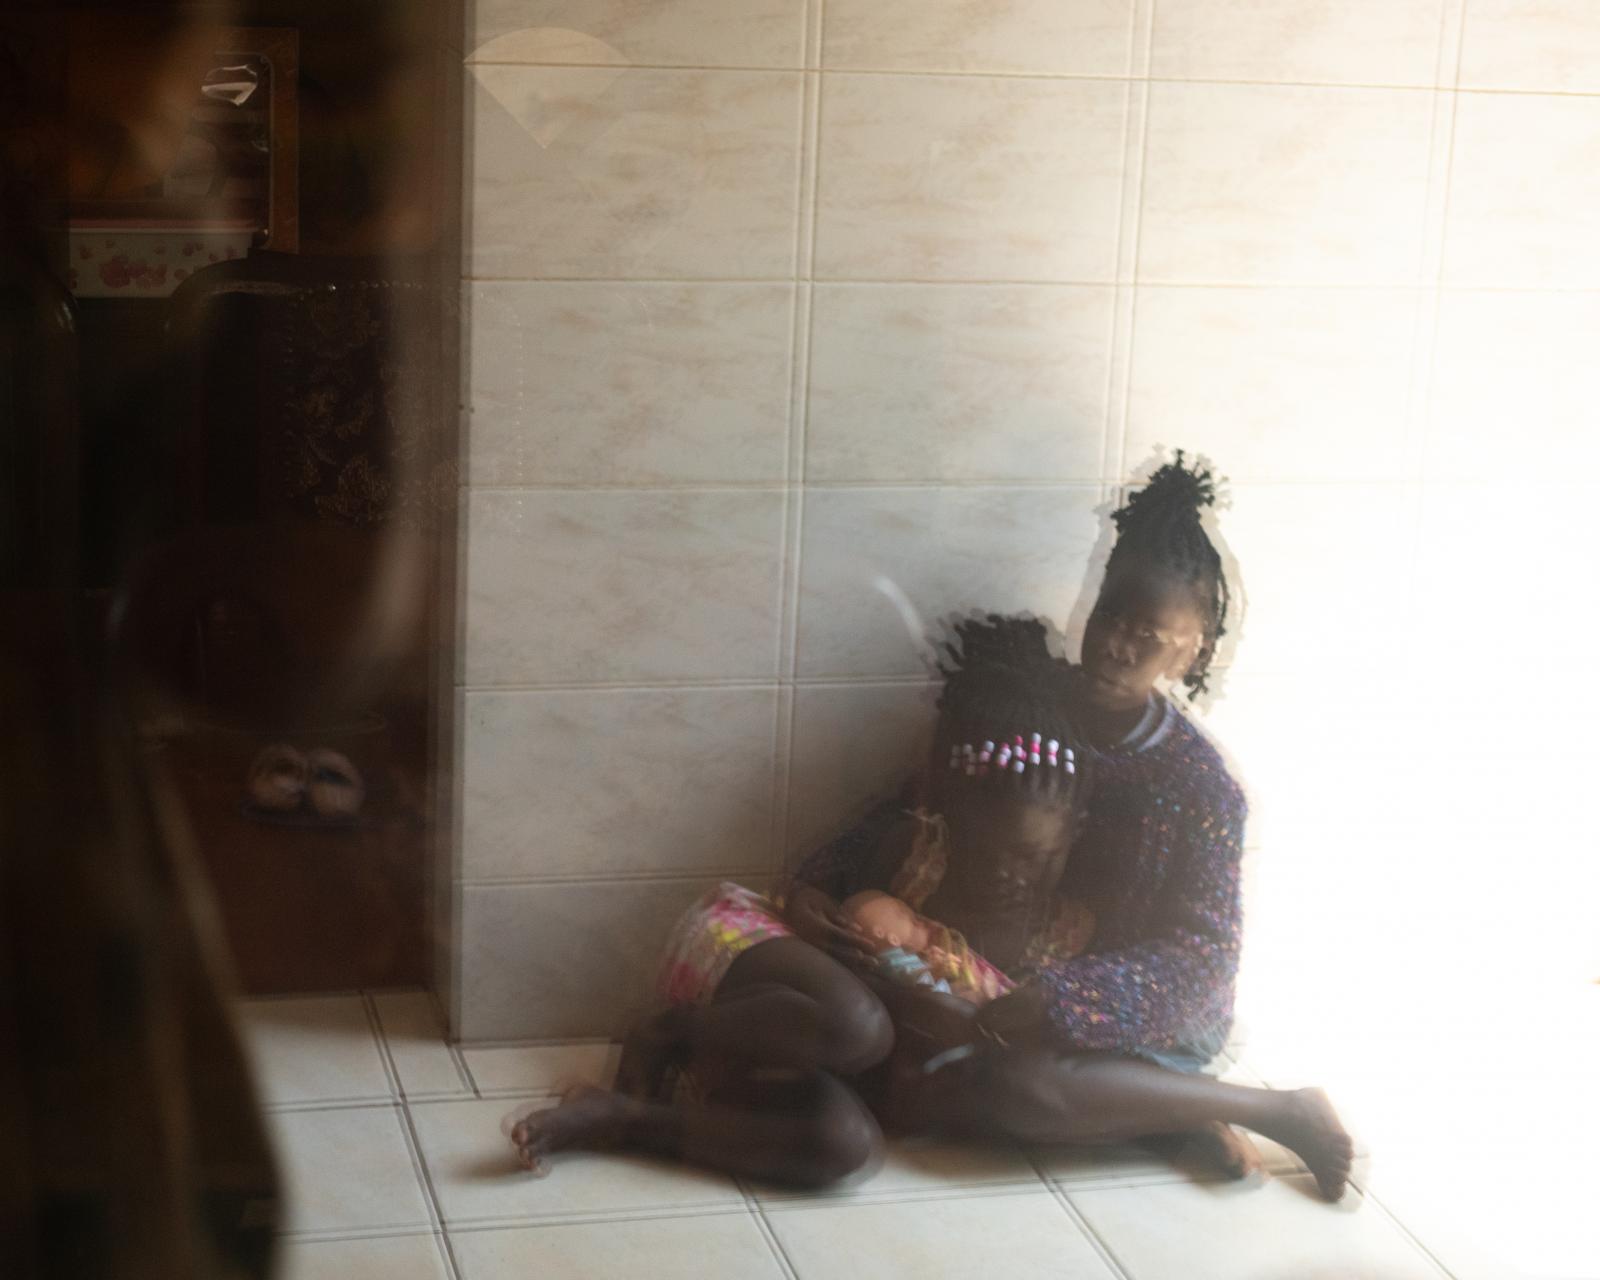 Image from Surviving Bery: A Girlhood Trauma | DeLovie Kwagala  - “My mother still hates me to this day because I...